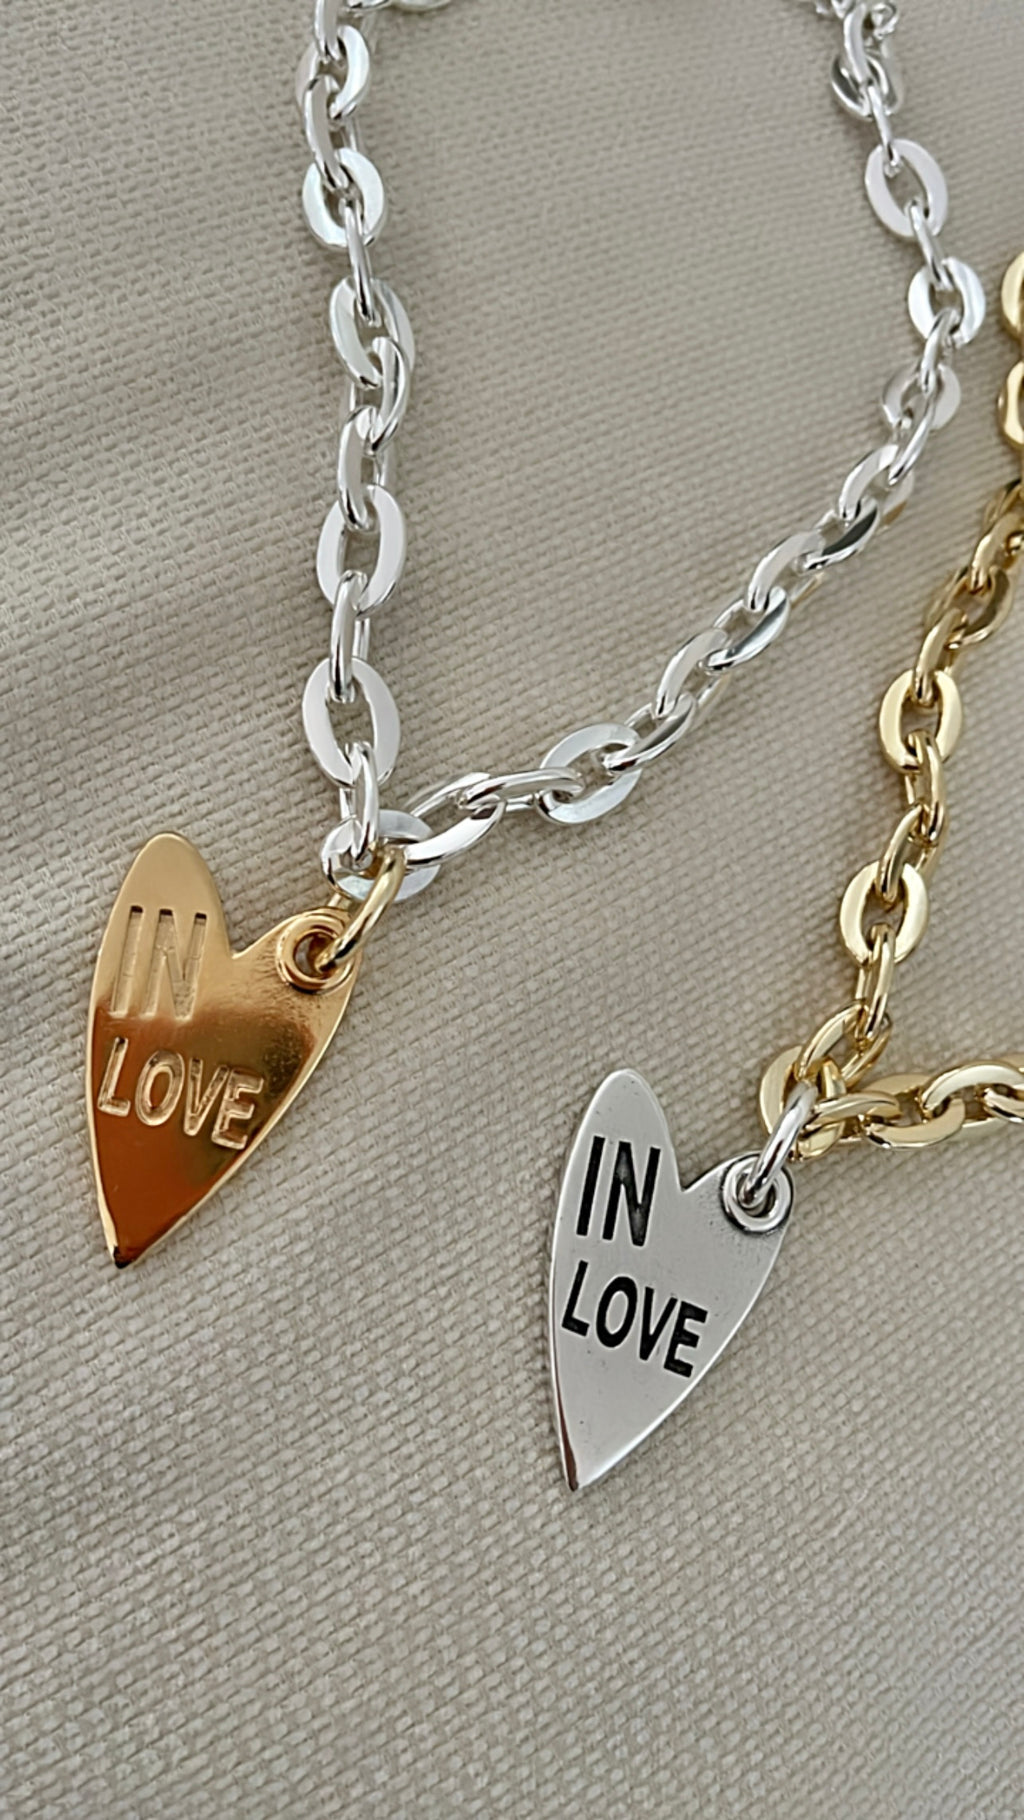 IN LOVE Necklace- From Spain